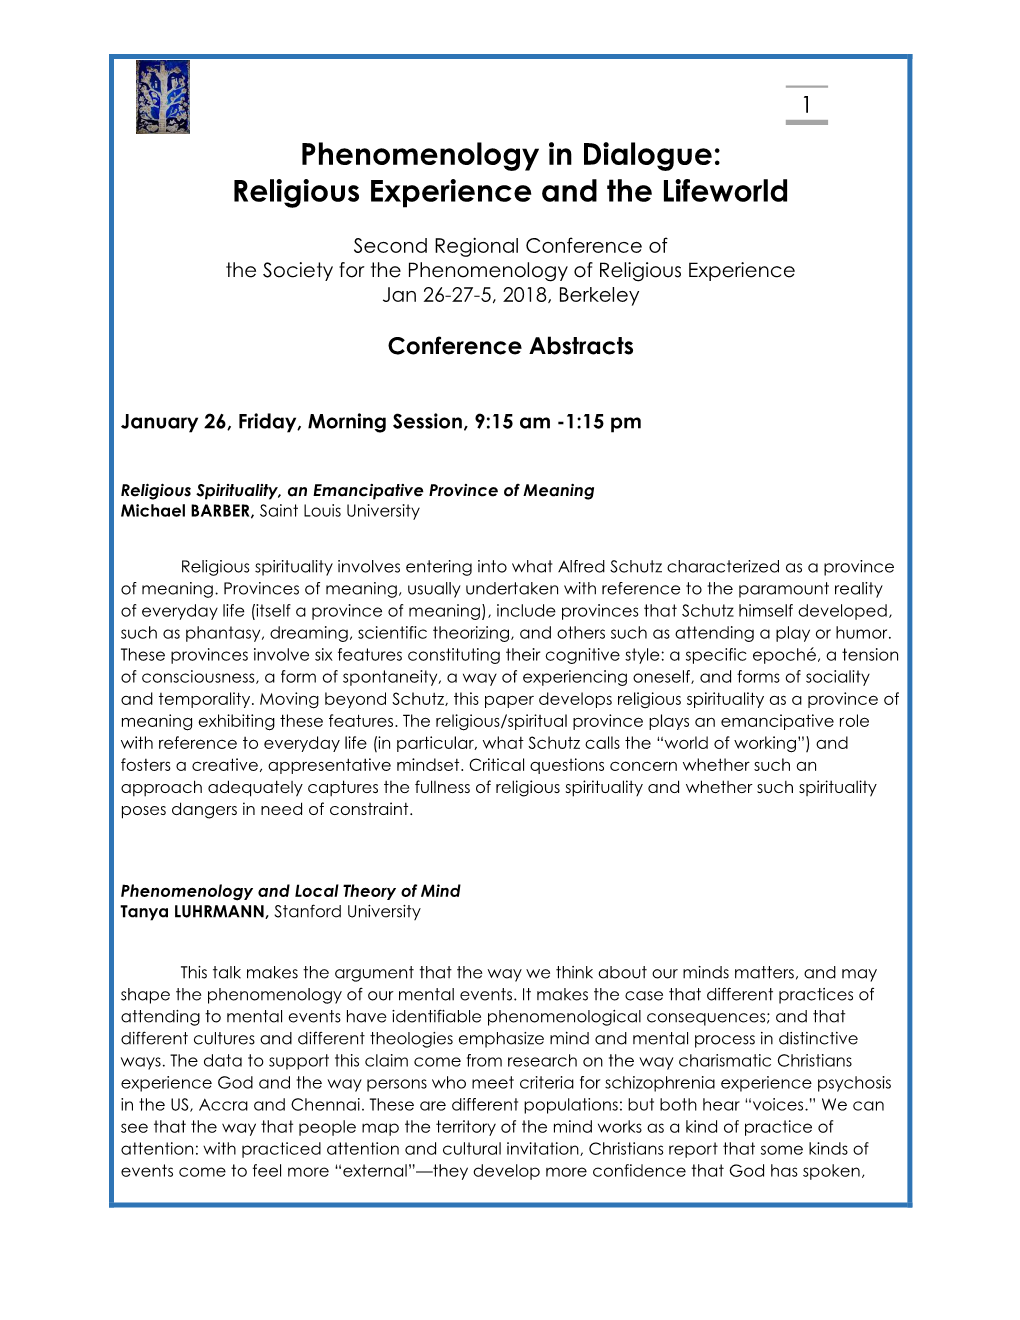 Phenomenology in Dialogue: Religious Experience and the Lifeworld